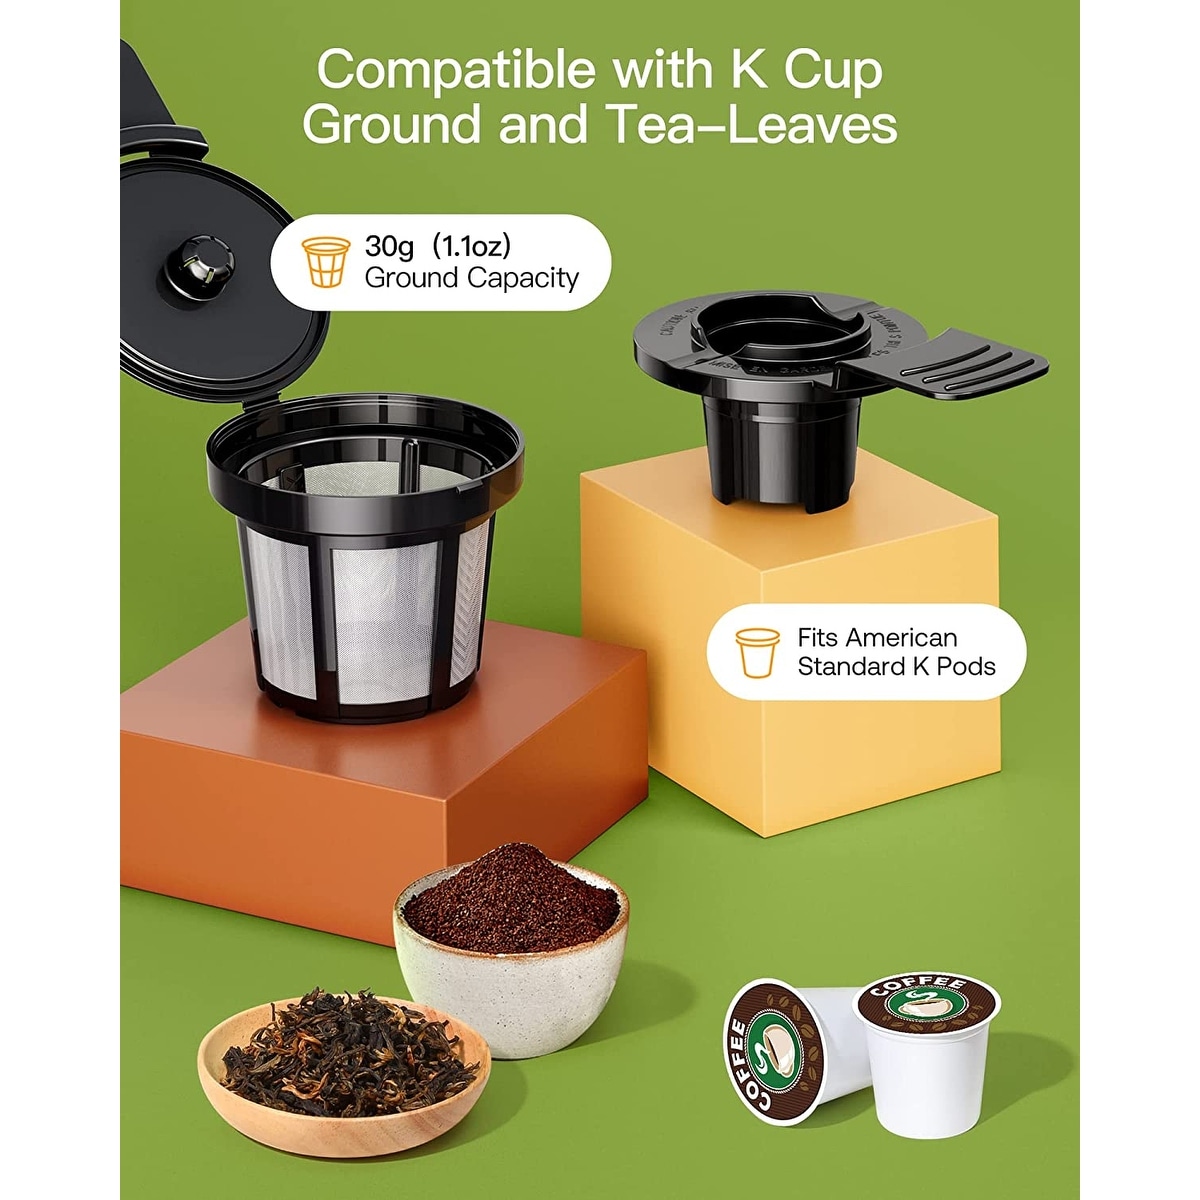 https://ak1.ostkcdn.com/images/products/is/images/direct/0a94726f4cbe719bd2130be11777e13f7f6c83f9/Hot-and-Iced-Coffee-Maker-for-K-Cups-and-Ground-Coffee%2C-4-5-Cups-Coffee-Maker-and-Single-serve-Brewers.jpg